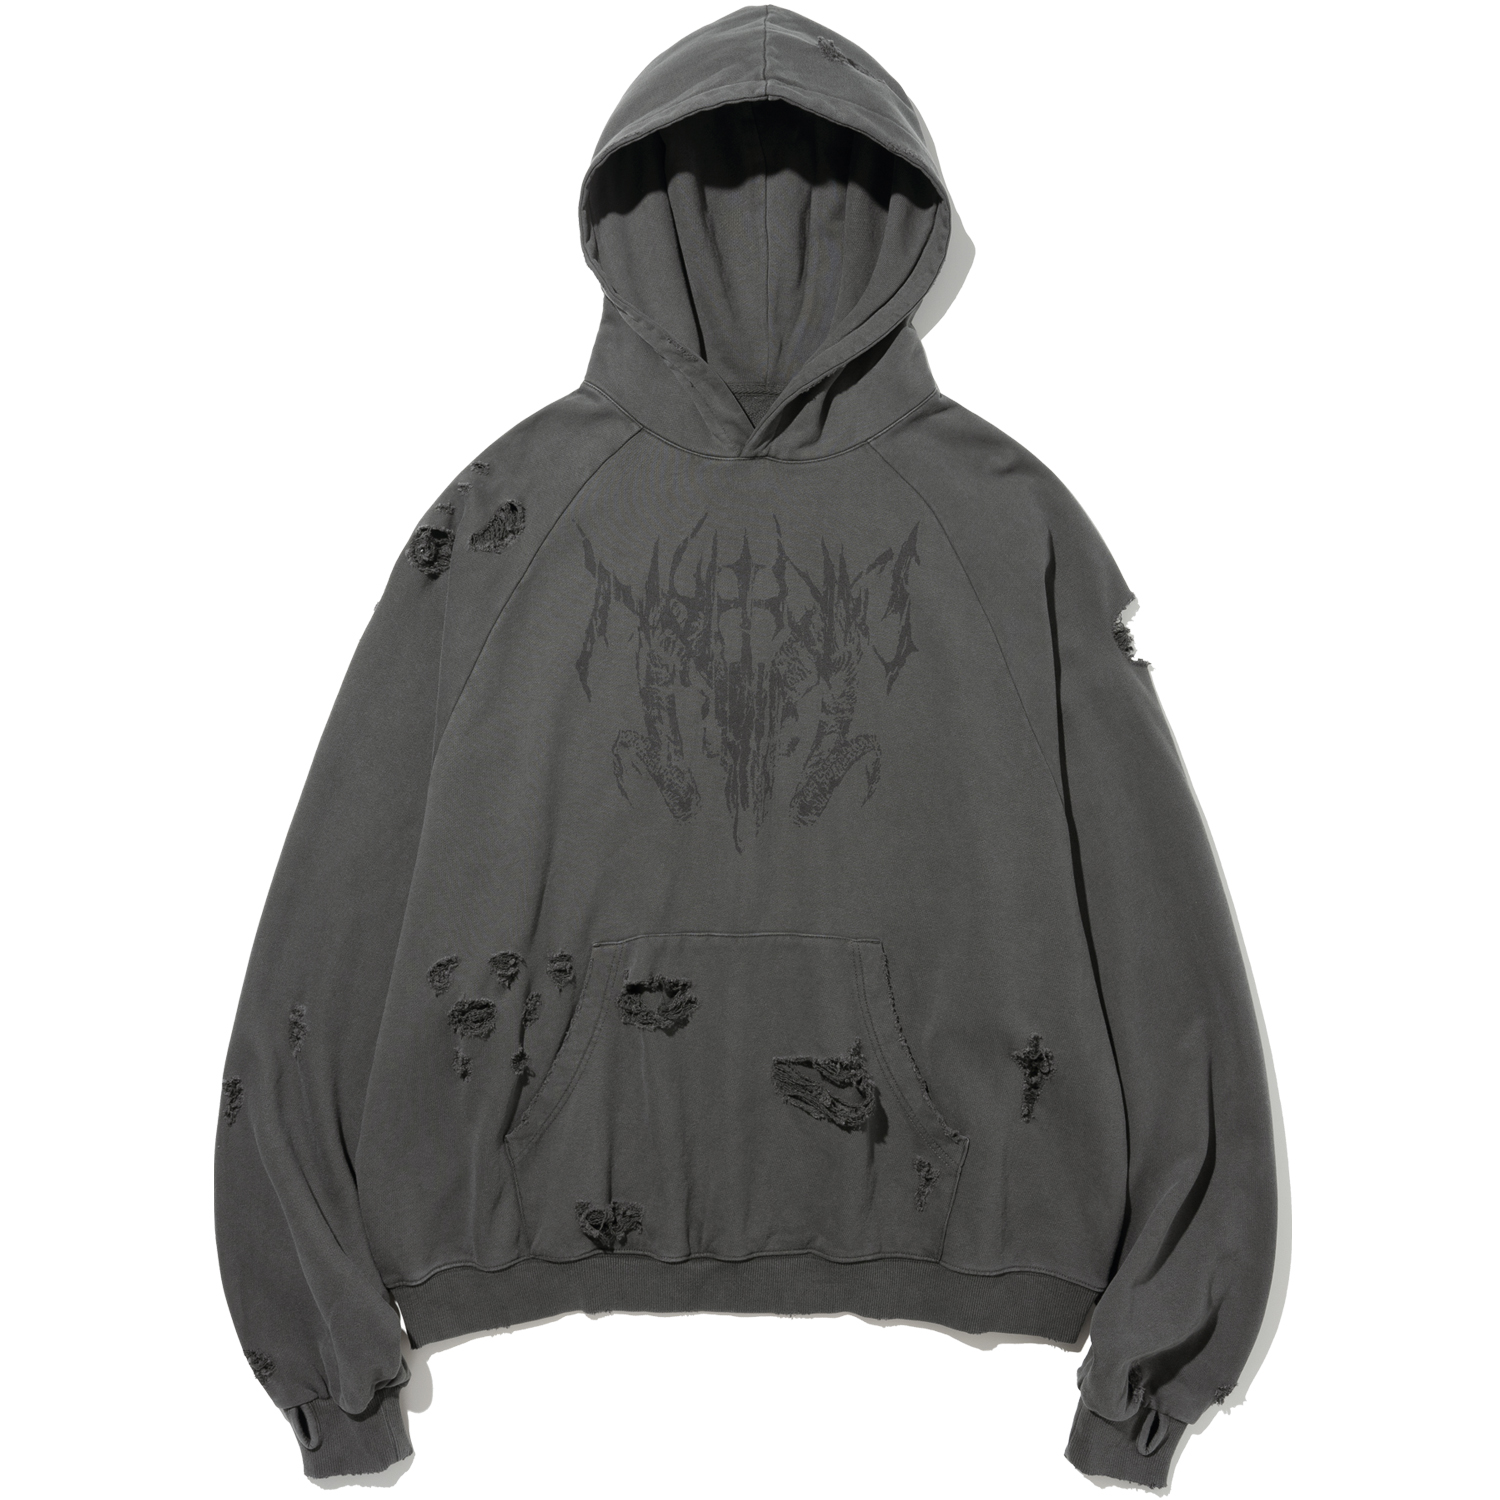 Destroyed Pigment Goat Pullover Hood - Charcoal,NOT4NERD